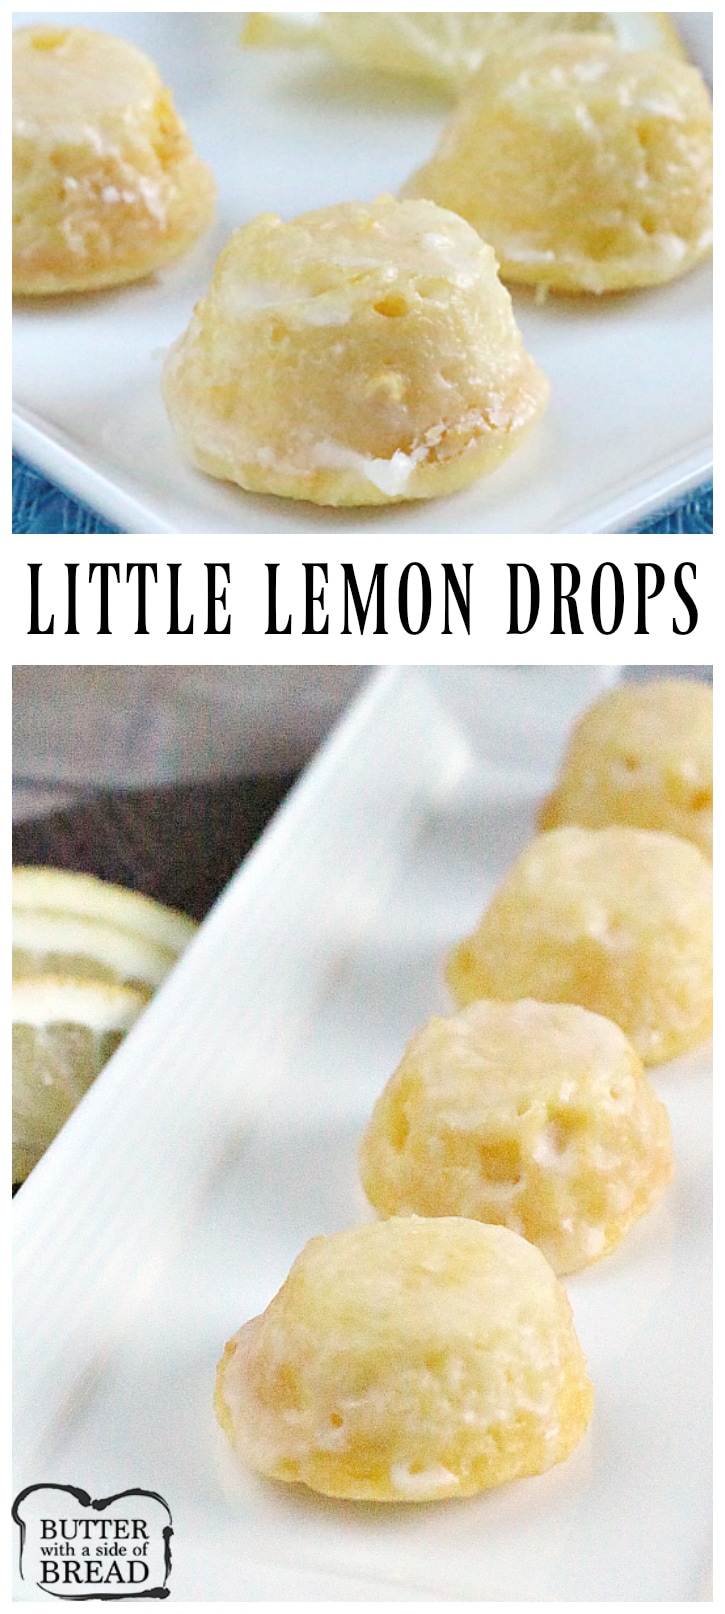 Little Lemon Drops are delicious bite-sized treats that start with a cake mix  - they are the perfect treat to take to your next party!